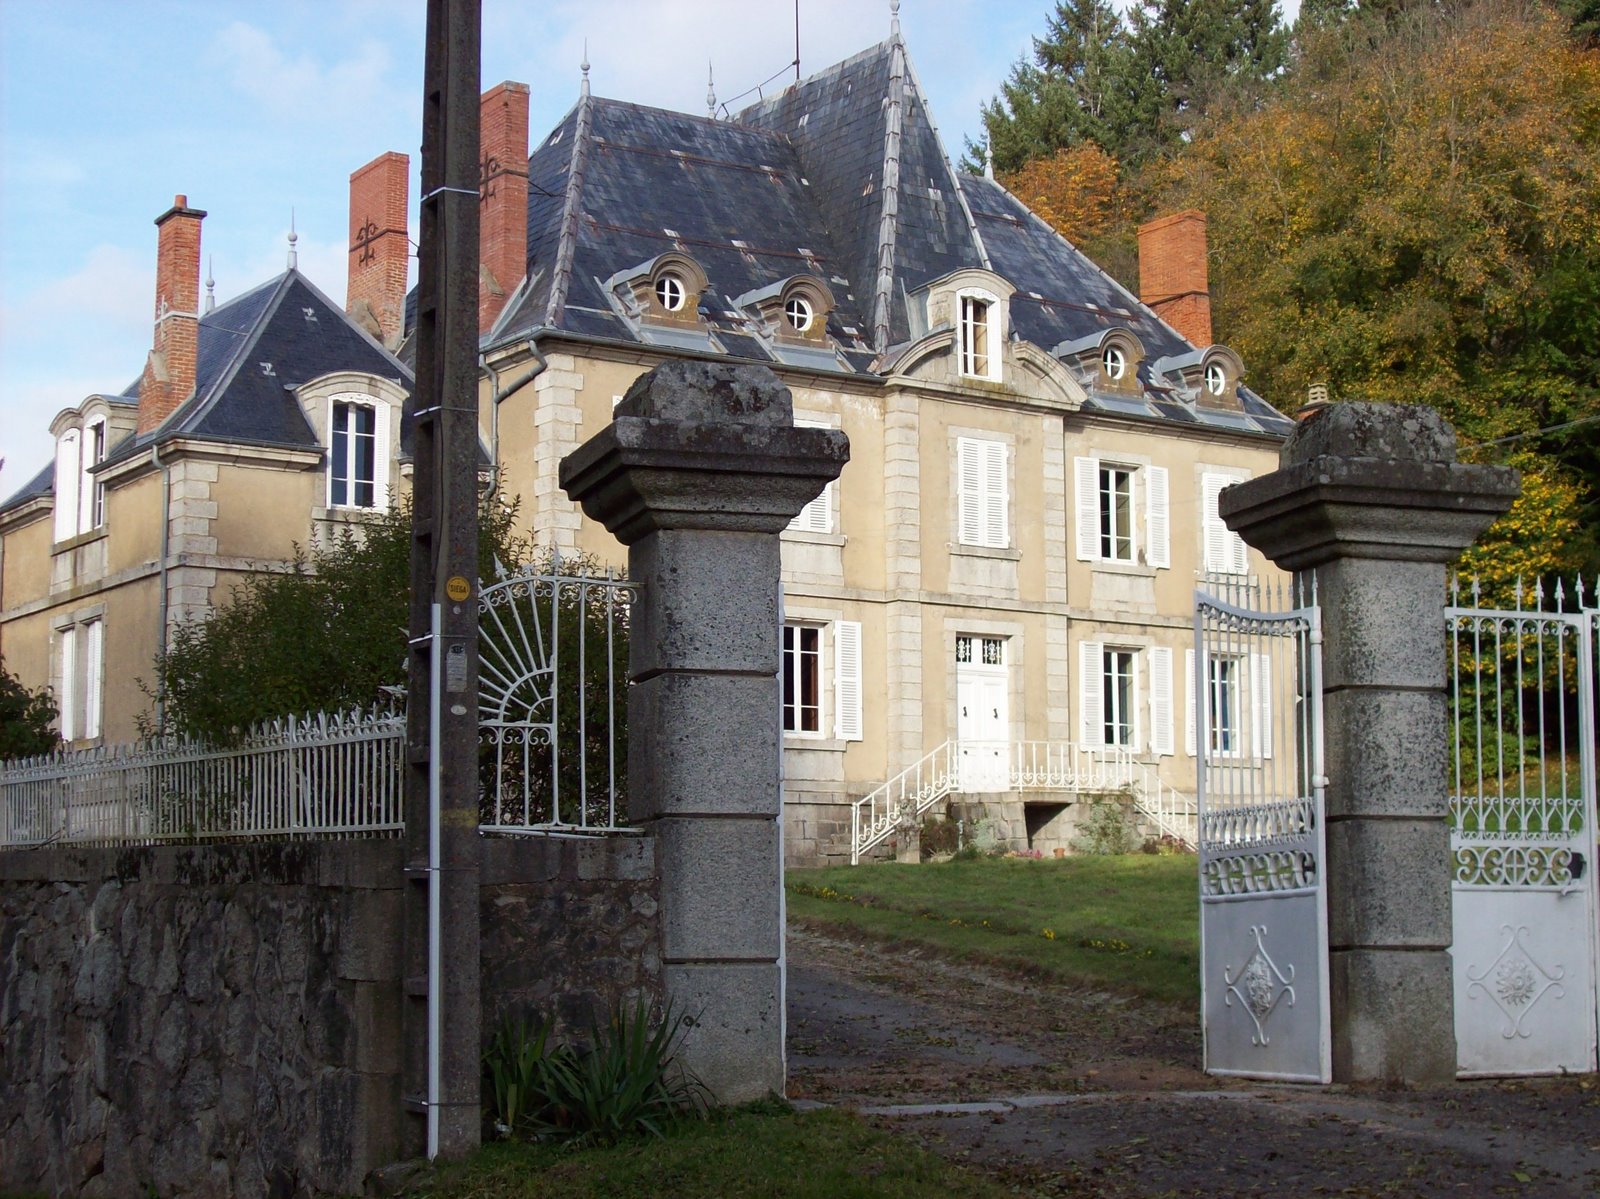 the gate to the main house has three archways on each side